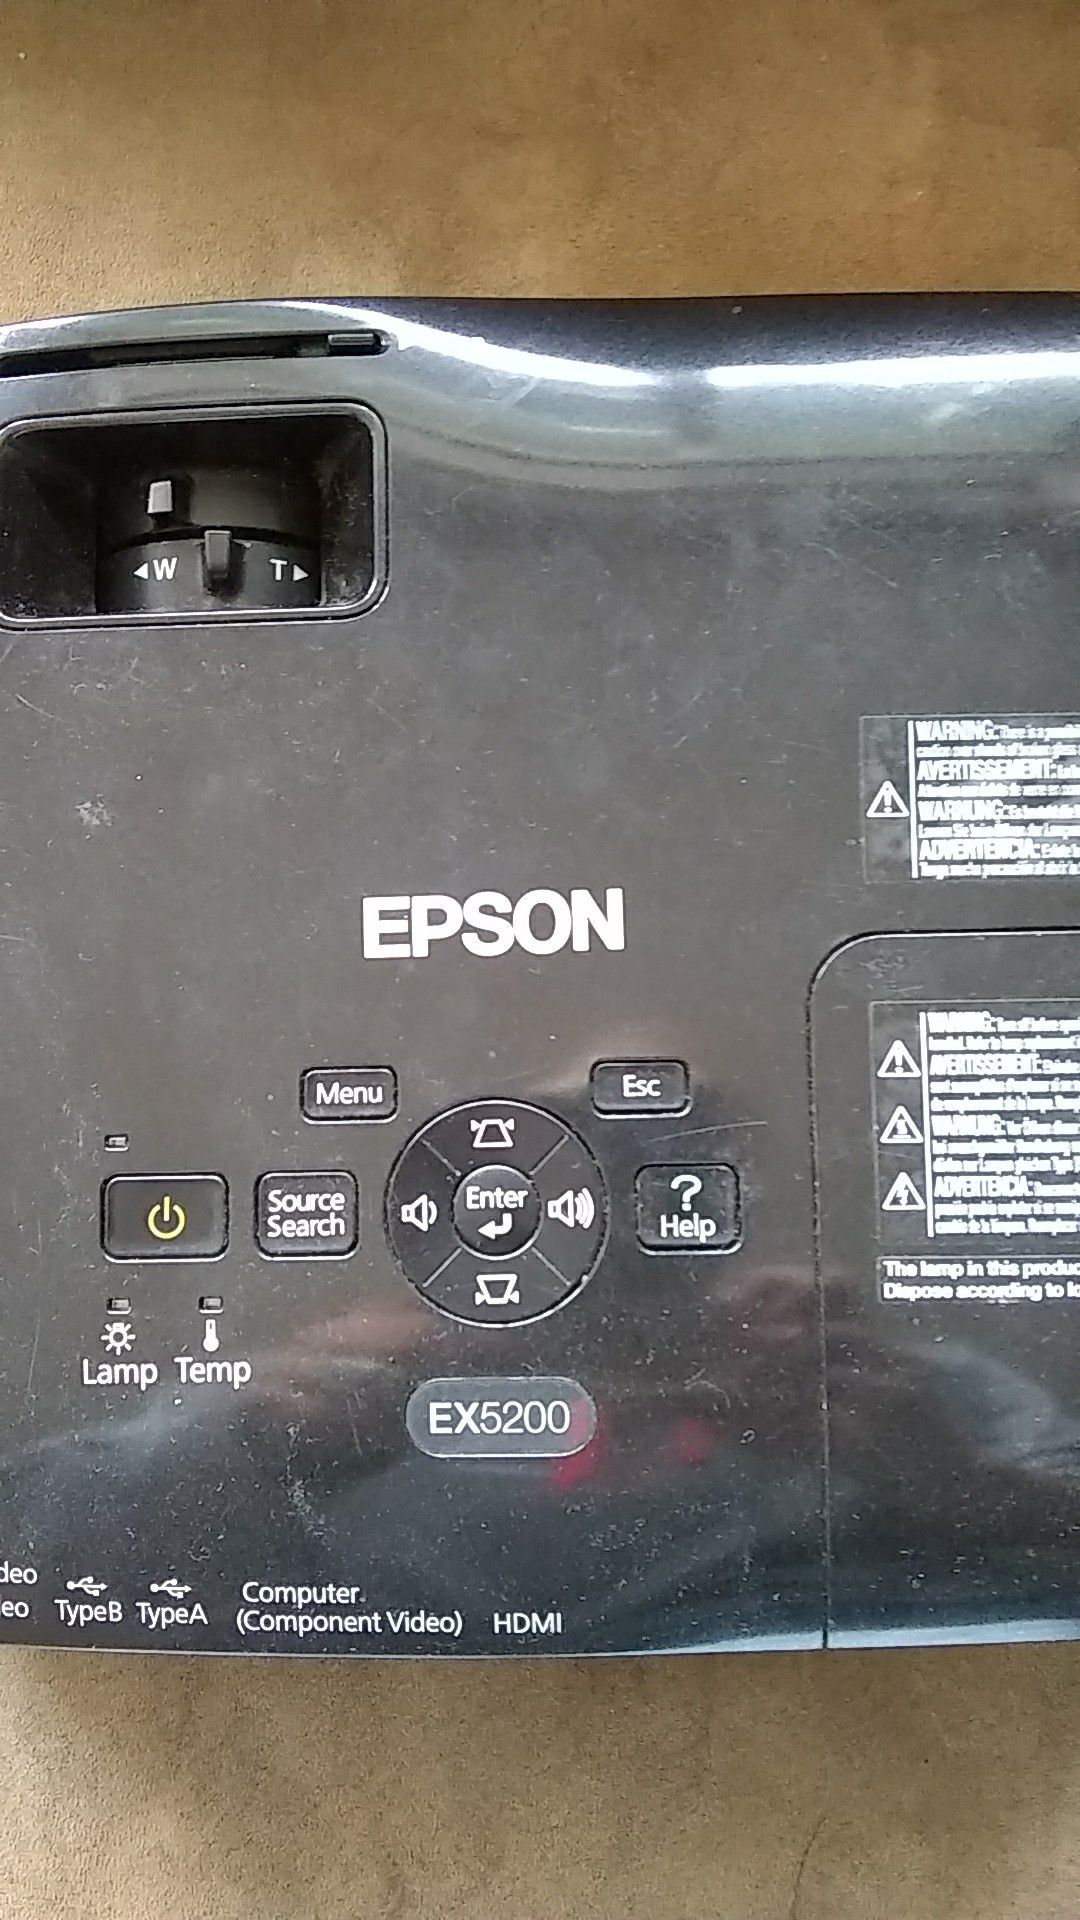 Epson high definition projector ex5200 in very nice condition